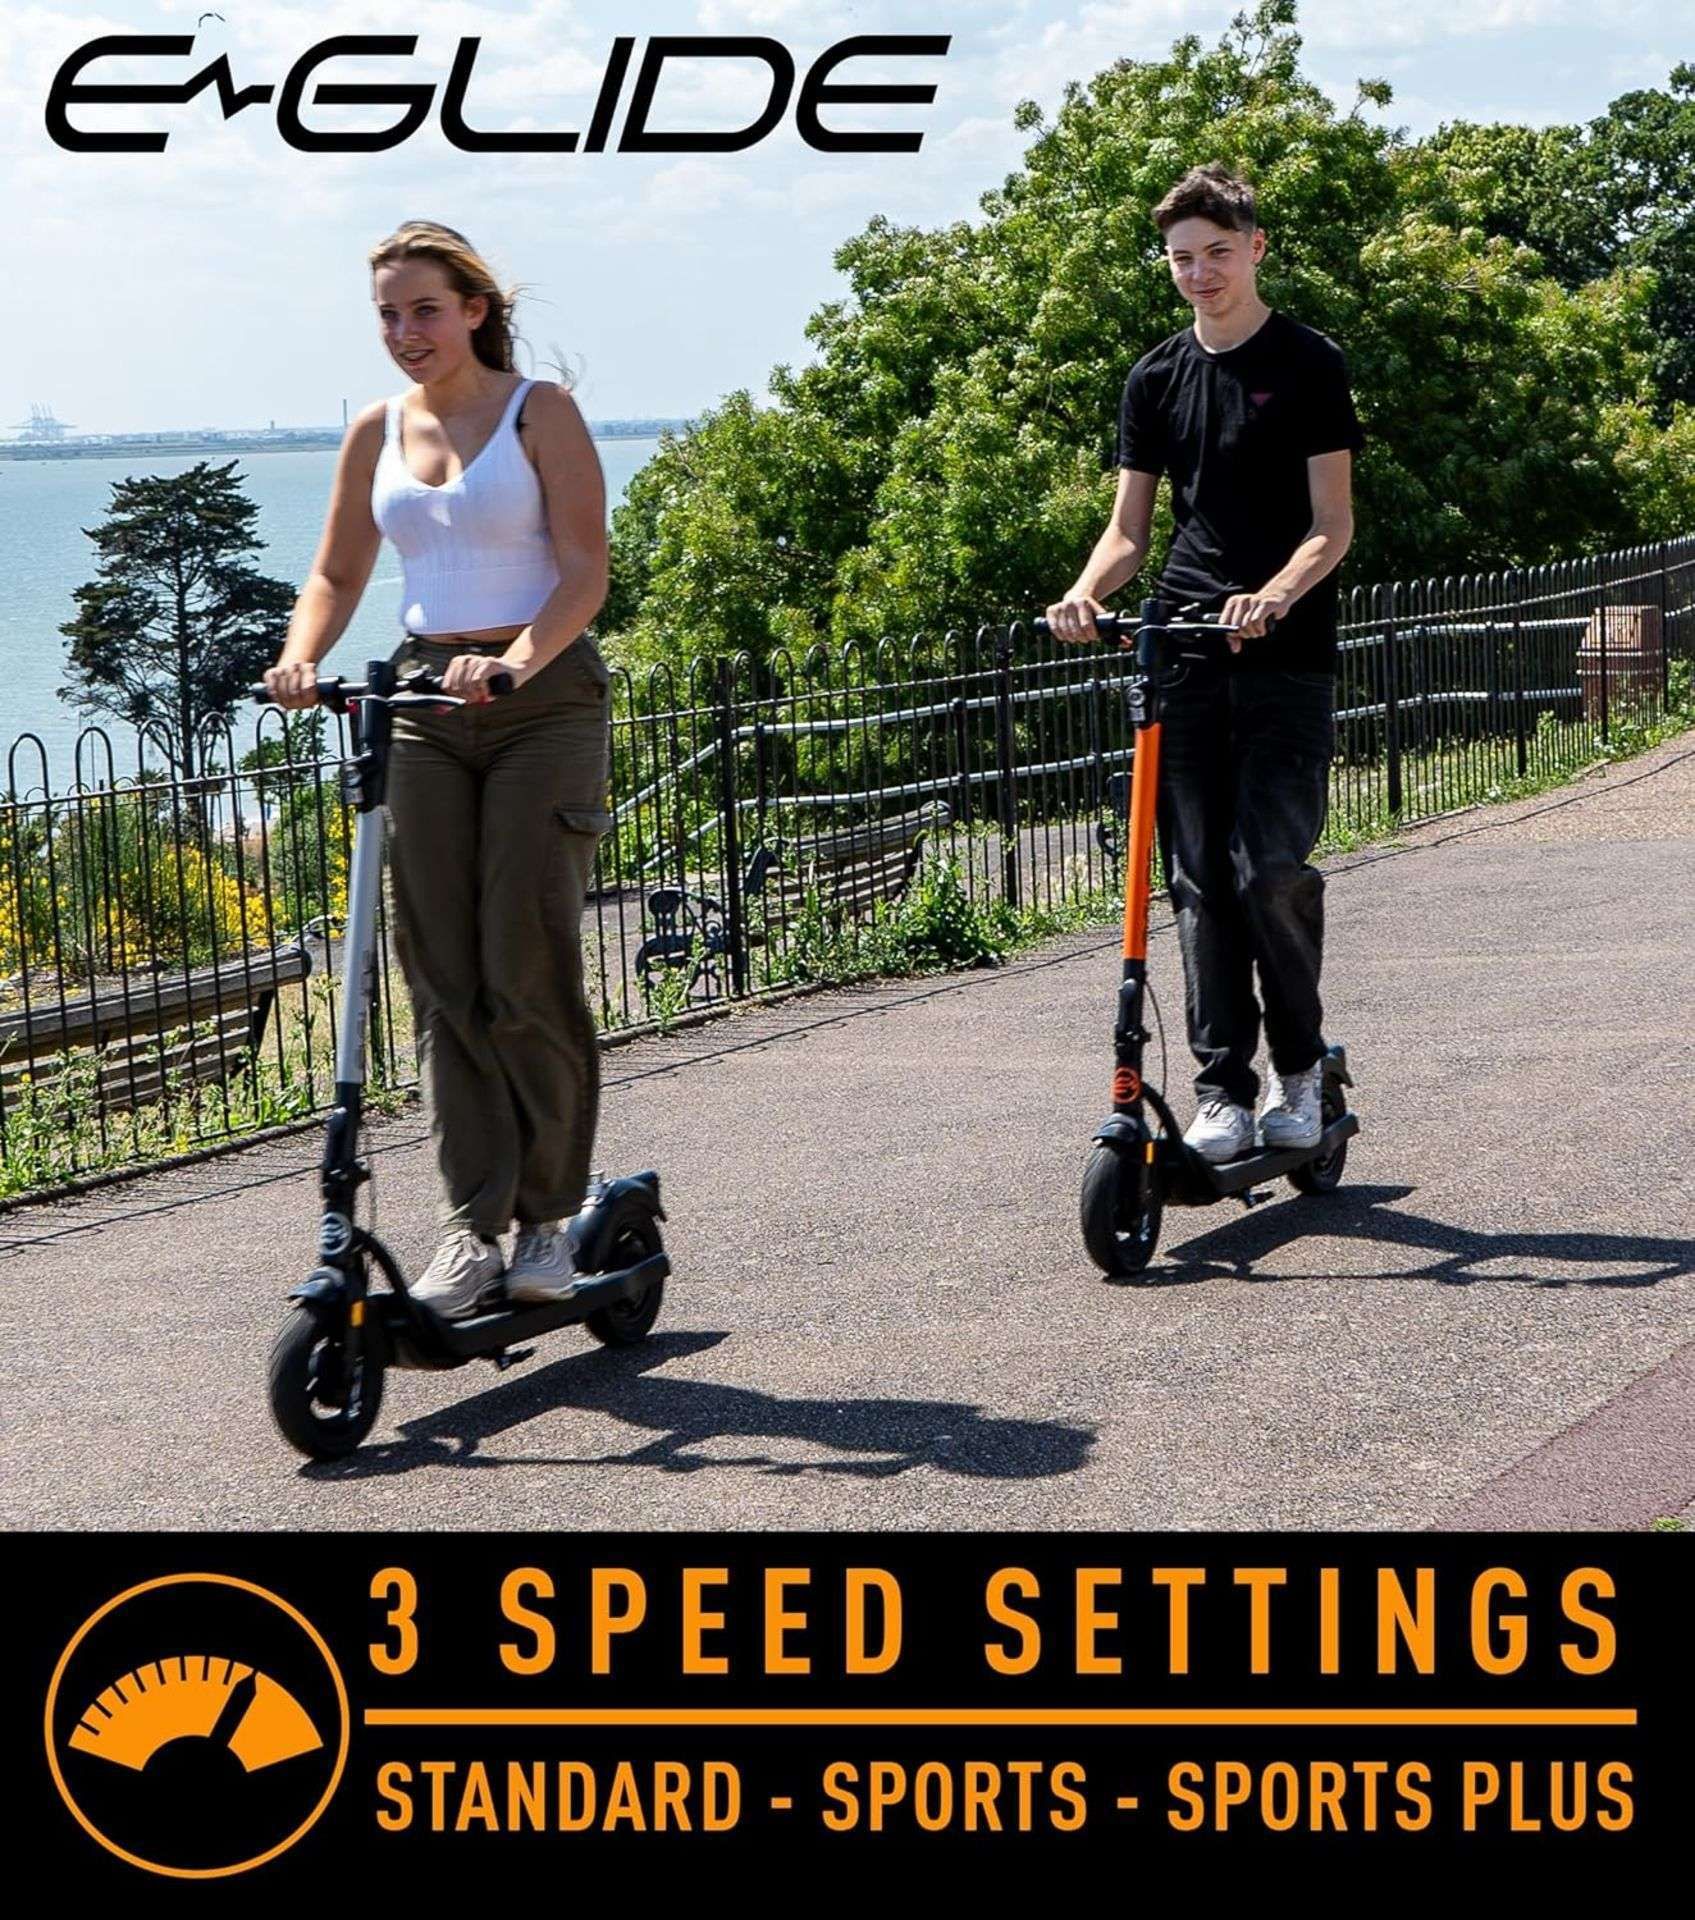 Brand New E-Glide V2 Electric Scooter Grey and Black RRP £599, Introducing a sleek and efficient - Bild 5 aus 5